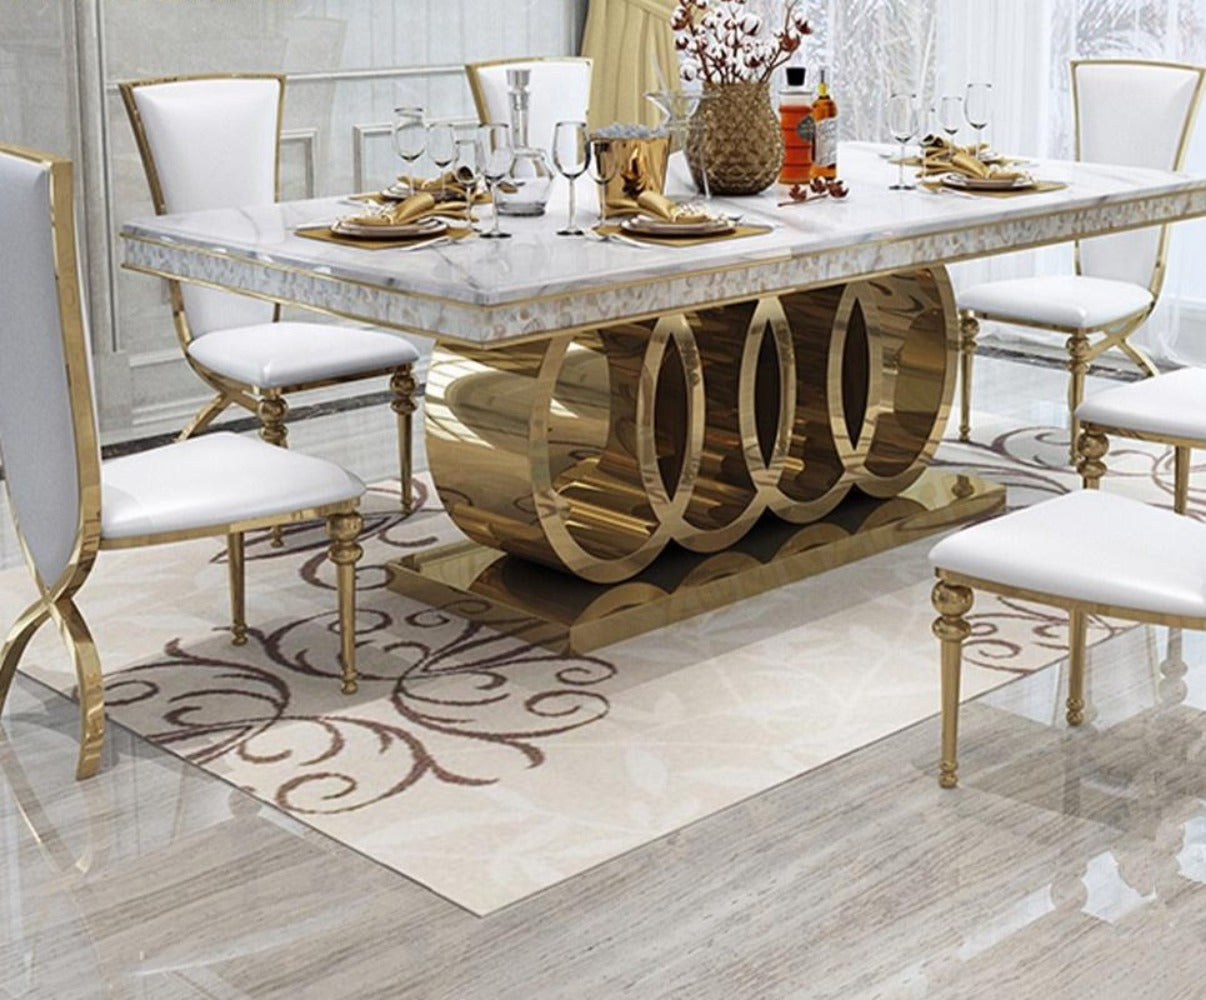 7 Pcs Elegant Designed Rectangular Marble Top Dining Table With 6 Chairs My Aashis